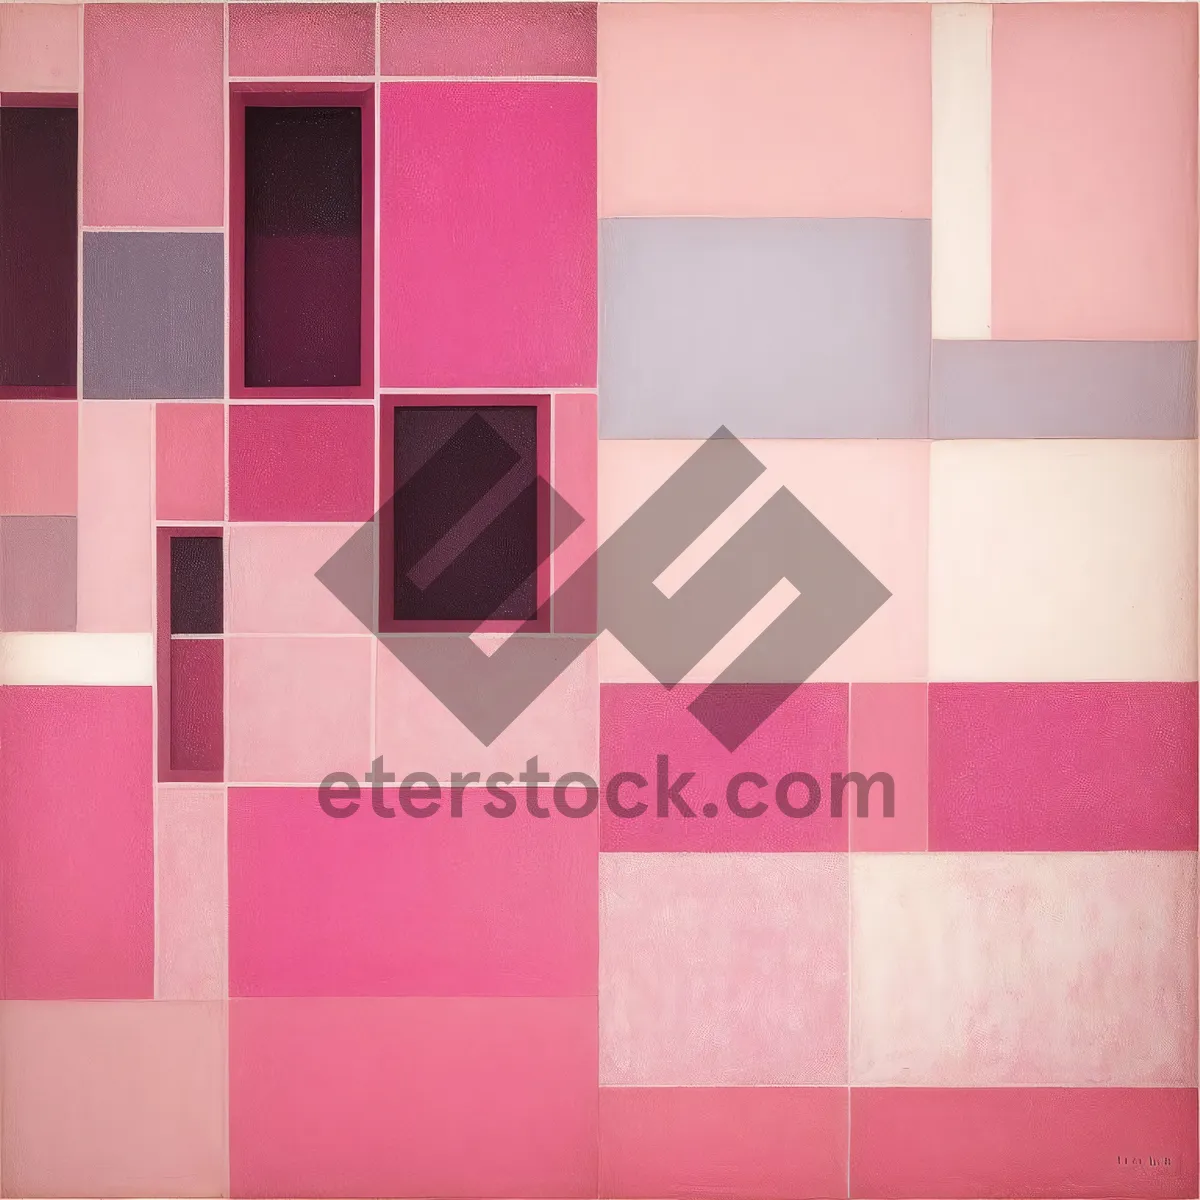 Picture of Colorful Mosaic Tile Checkers Pattern Graphic